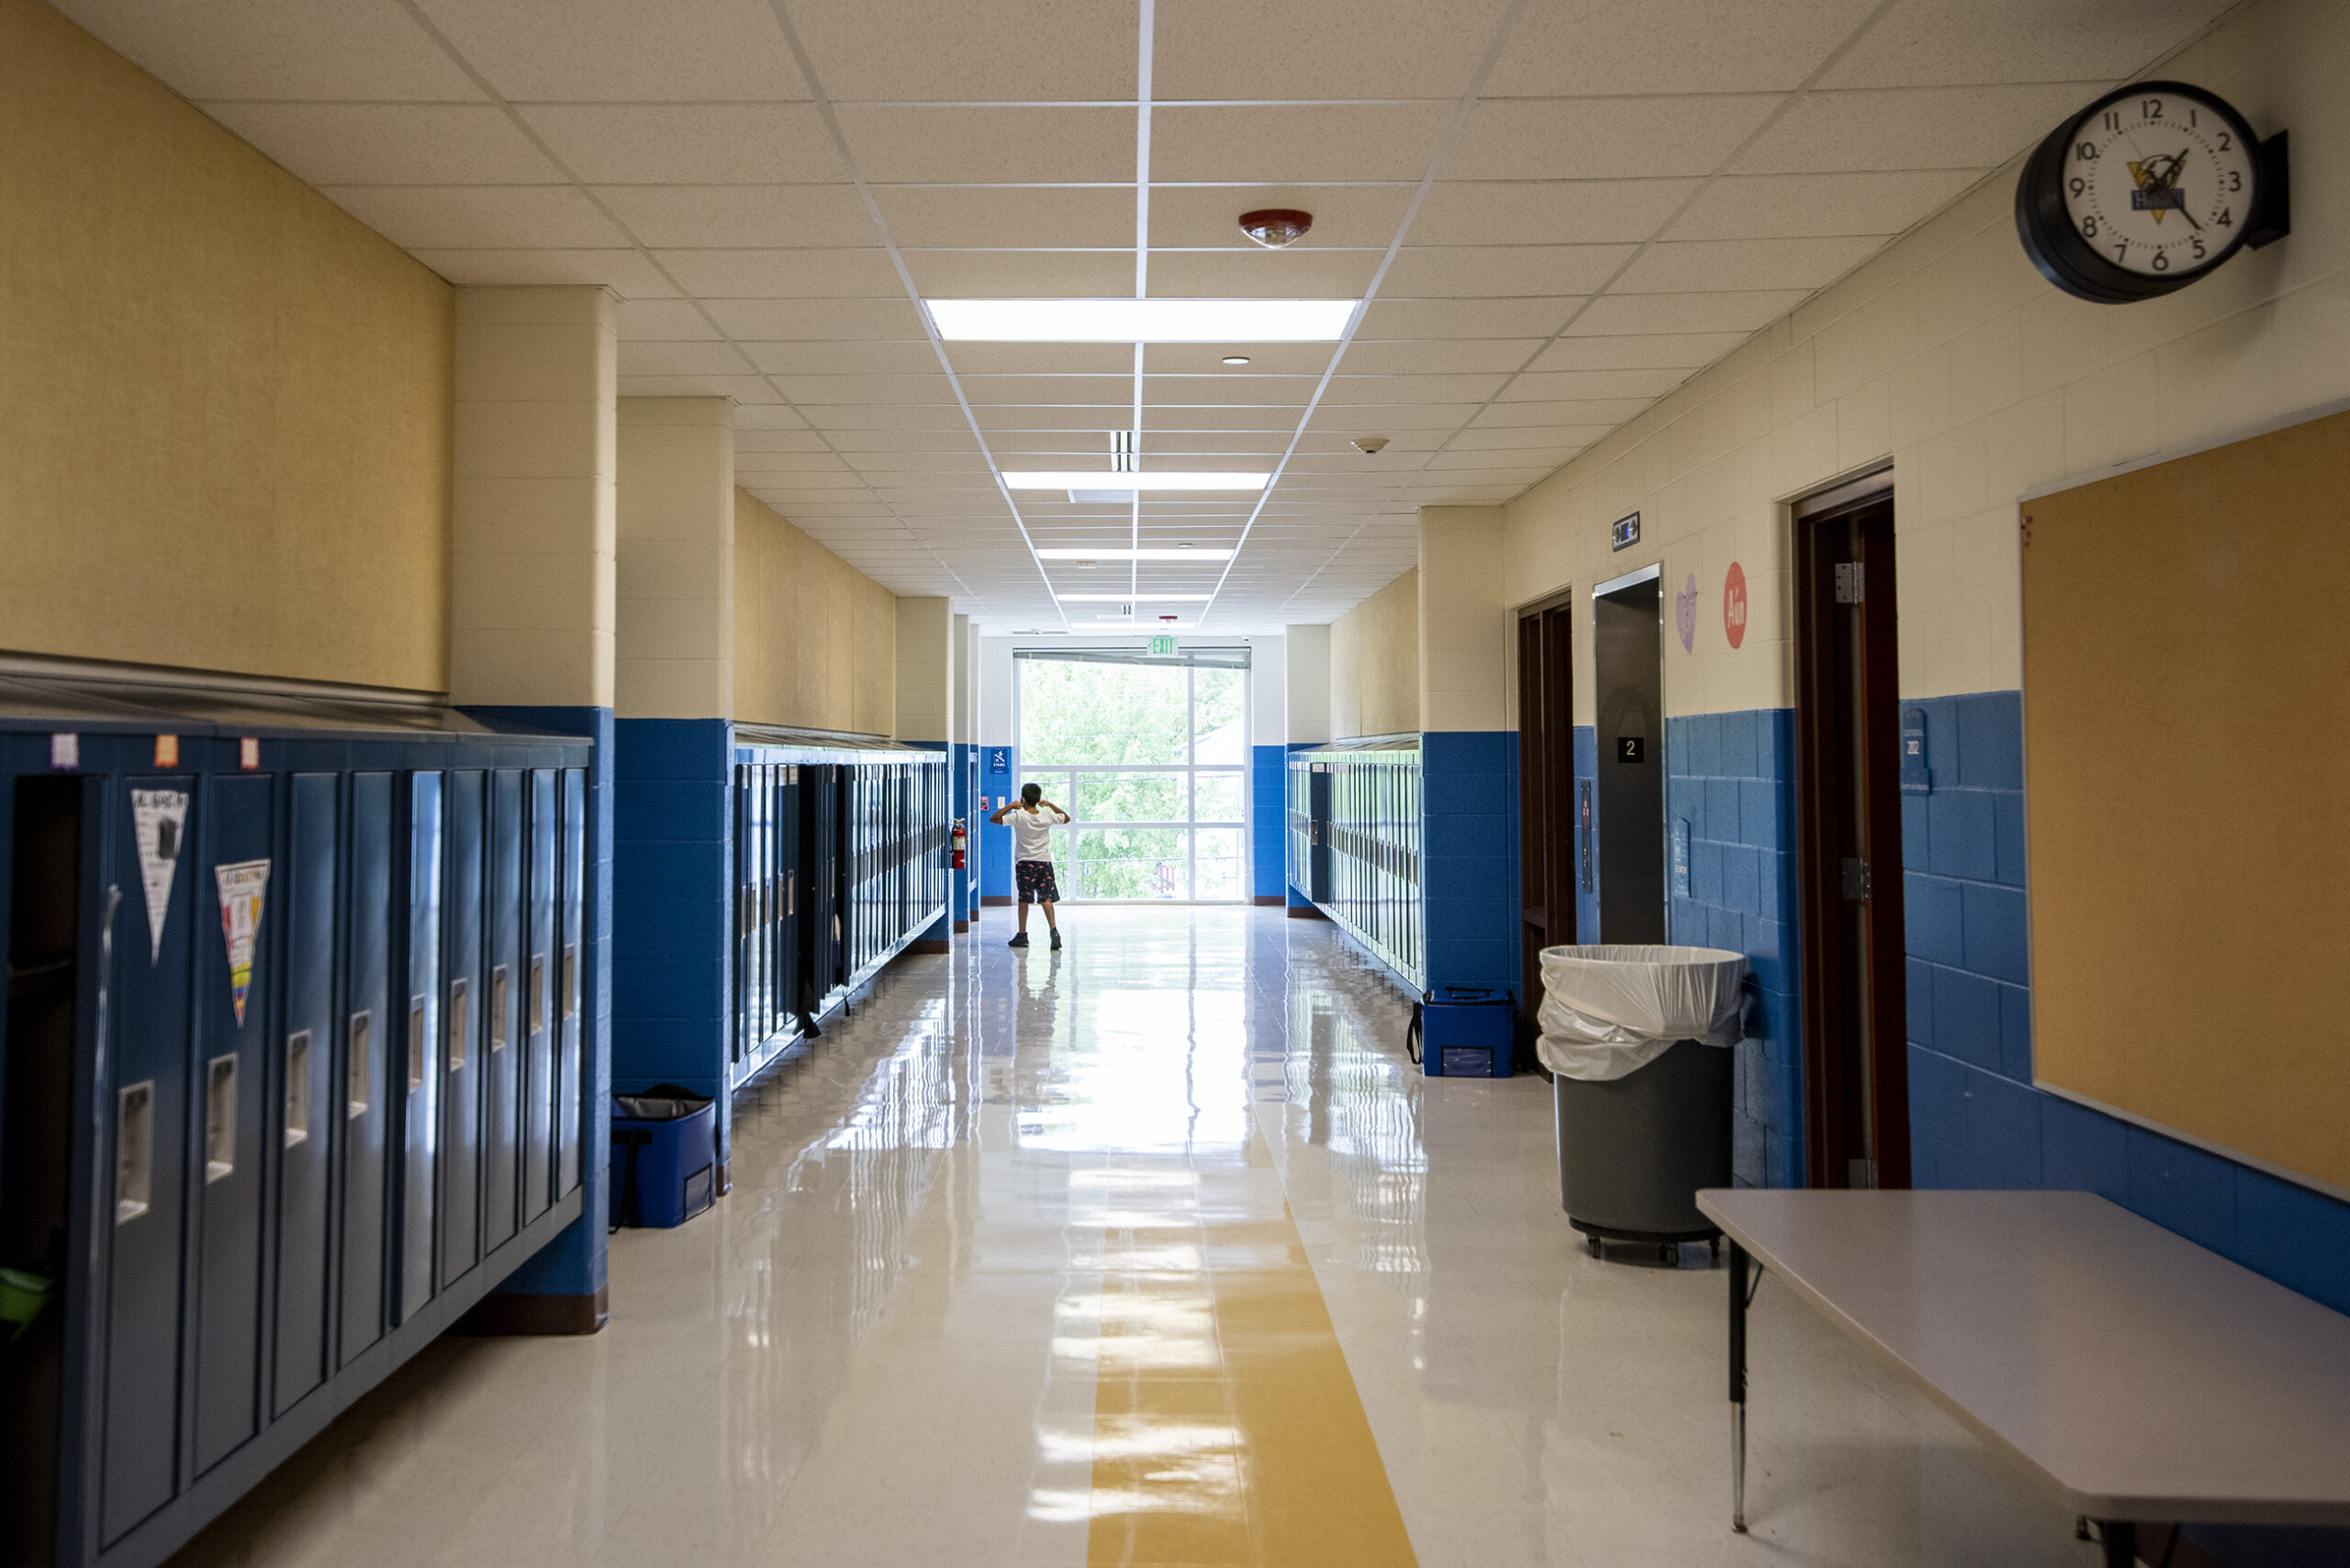 Facing declining enrollment and stagnant revenue, some Wisconsin schools are cutting staff